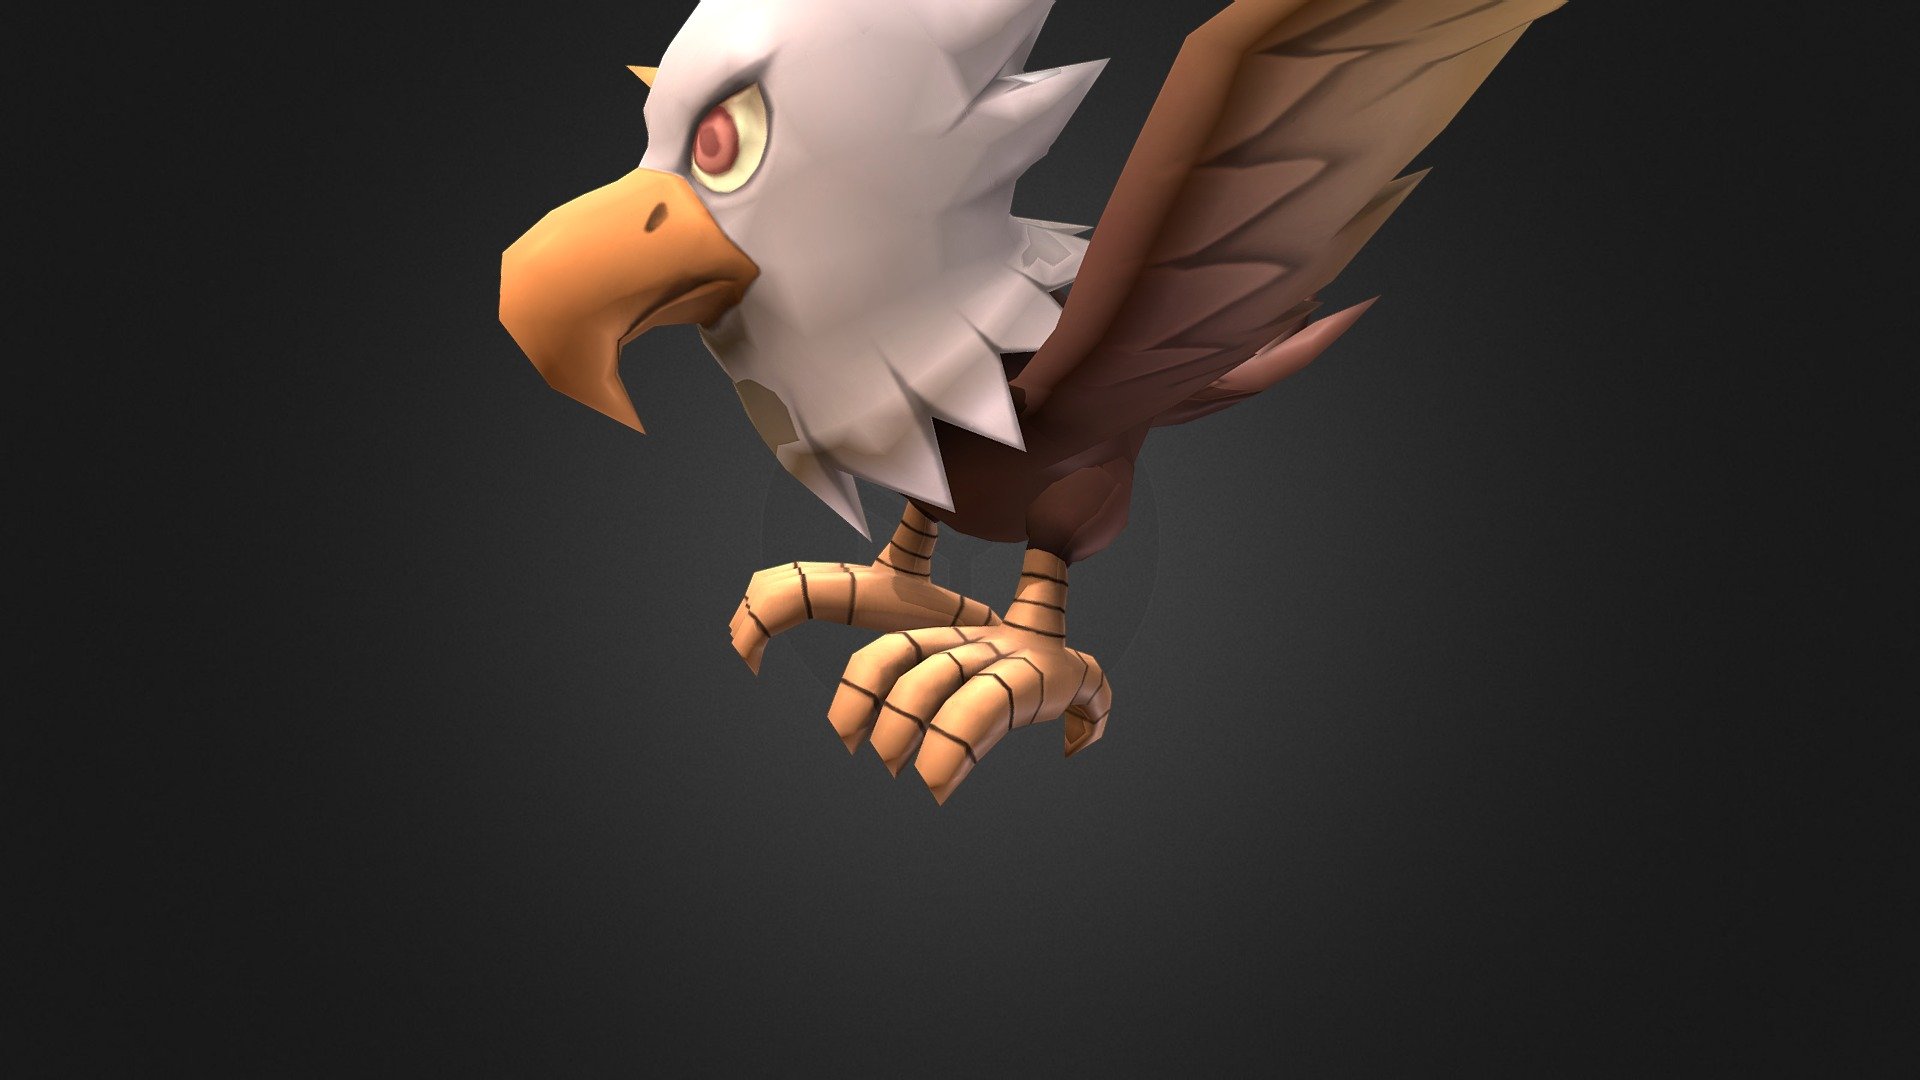 Supported Unity versions 2018.4.8 or higher



Eagle (1034 vertex)



6 colors textures 2048x2048 png



10 basic animations



Idle / Walk / Run / Attack x3 / Damage / Stunned / Die / GetUp



Animation Preview

https://youtu.be/xewno6kU21o
 - Poly HP - Eagle - Buy Royalty Free 3D model by Downrain DC (@downraindc3d) 3d model